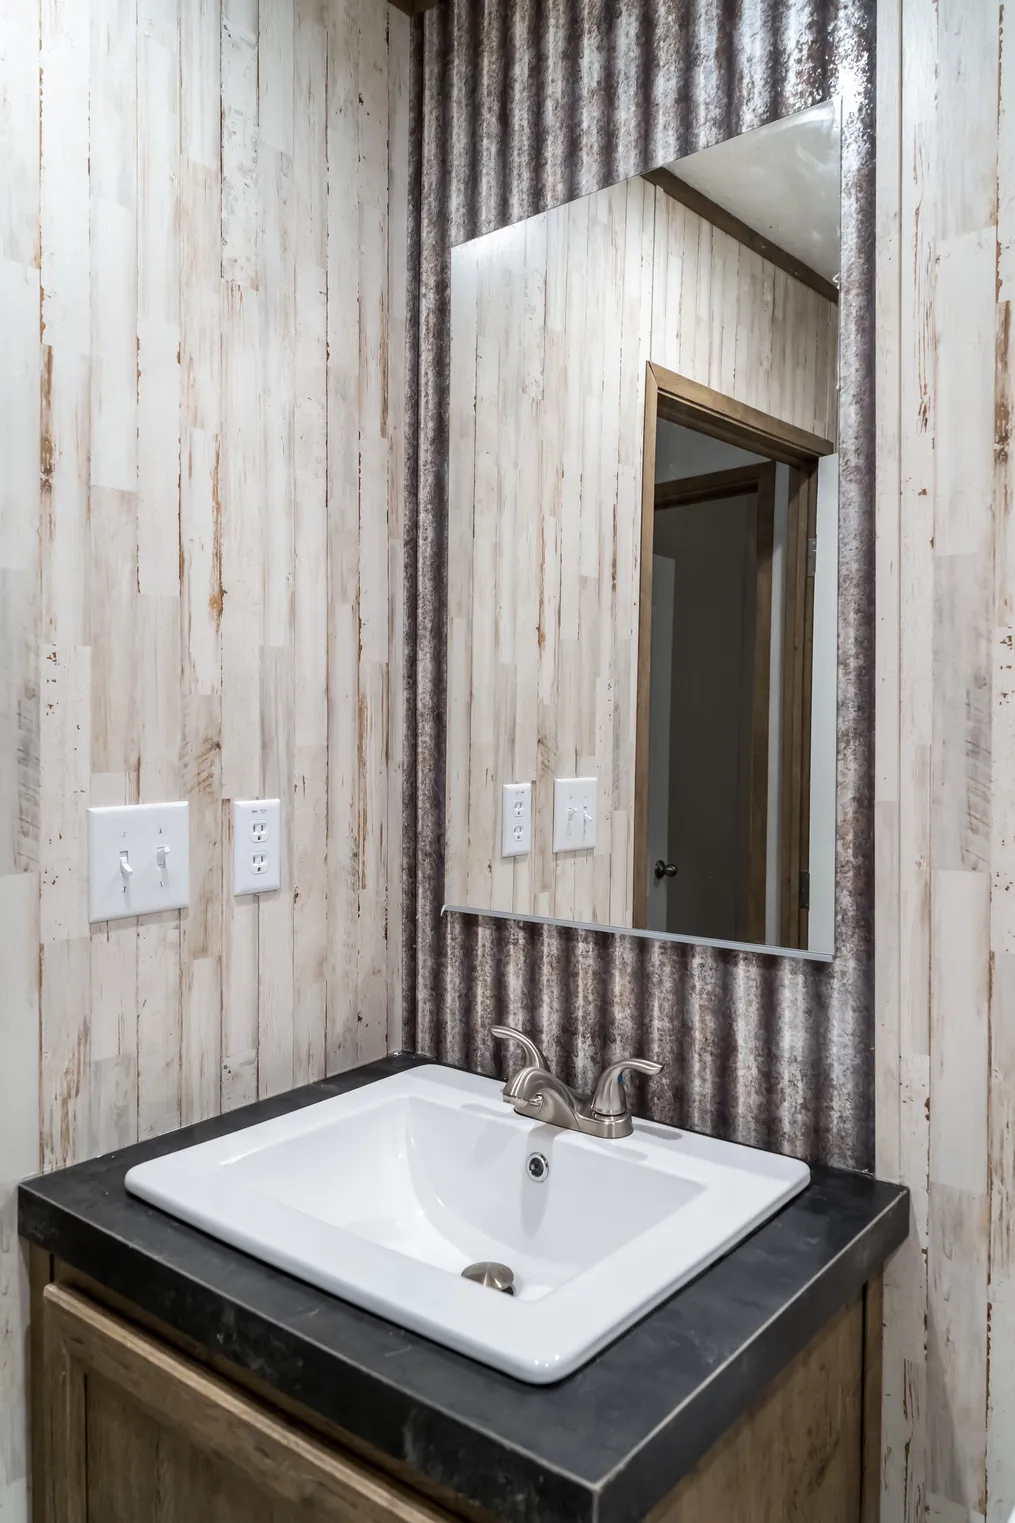 The ANNIVERSARY SPLASH Guest Bathroom. This Manufactured Mobile Home features 3 bedrooms and 2 baths.